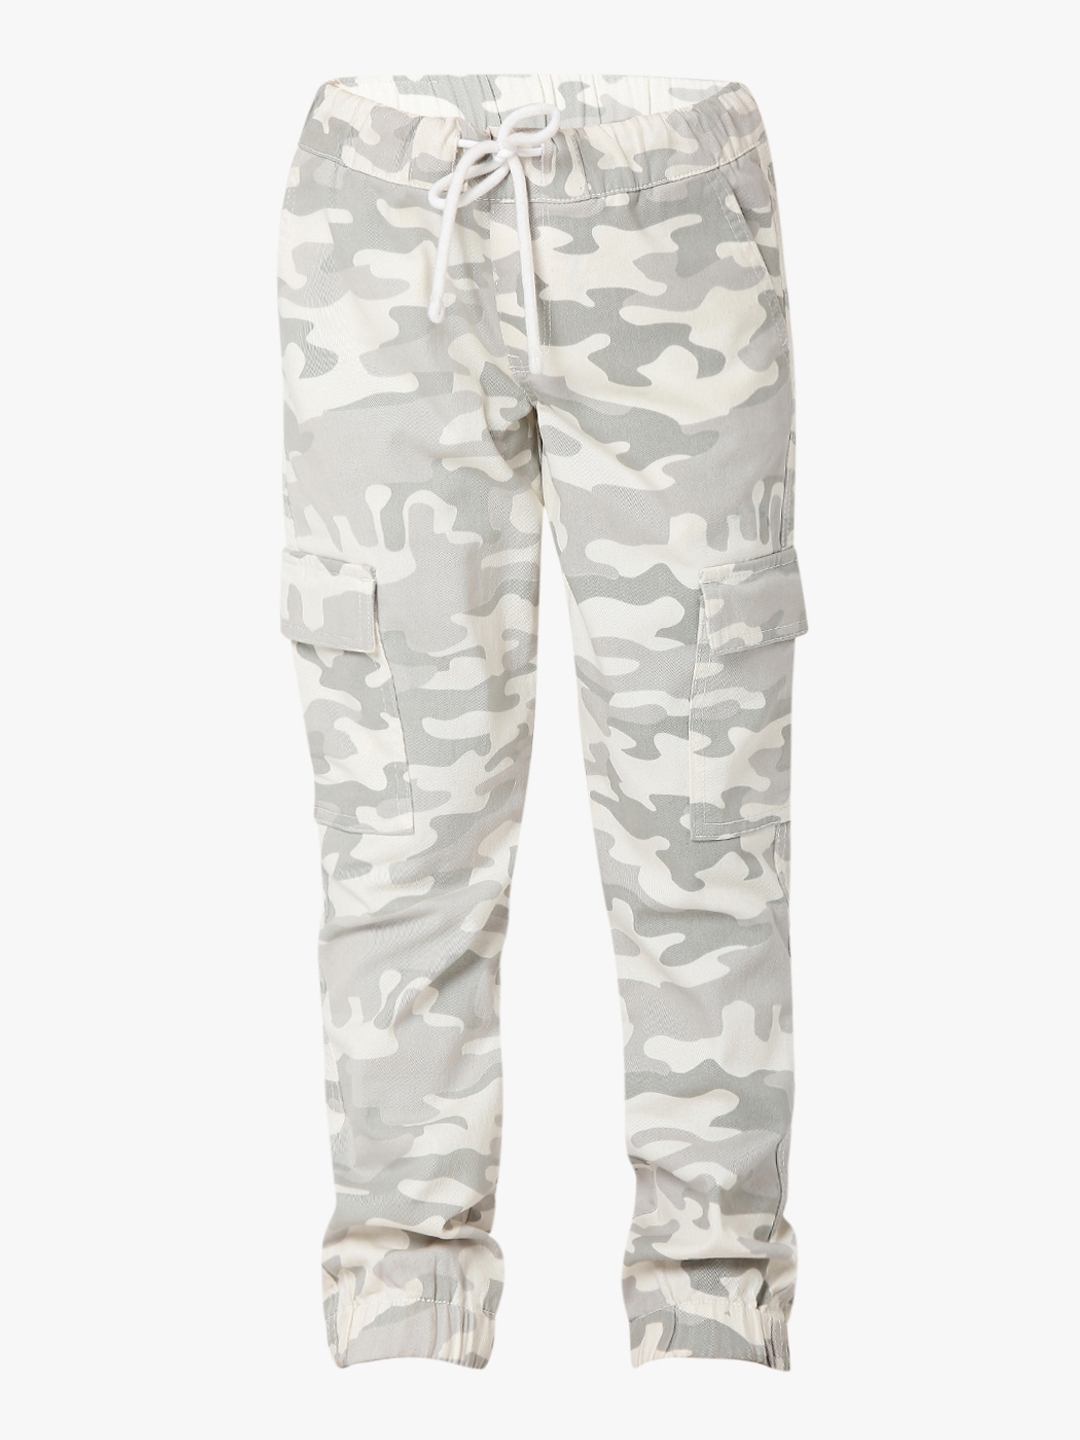 Sapper Joggers  Buy Sapper Mens Blue Cotton Camouflage Joggers Online   Nykaa Fashion